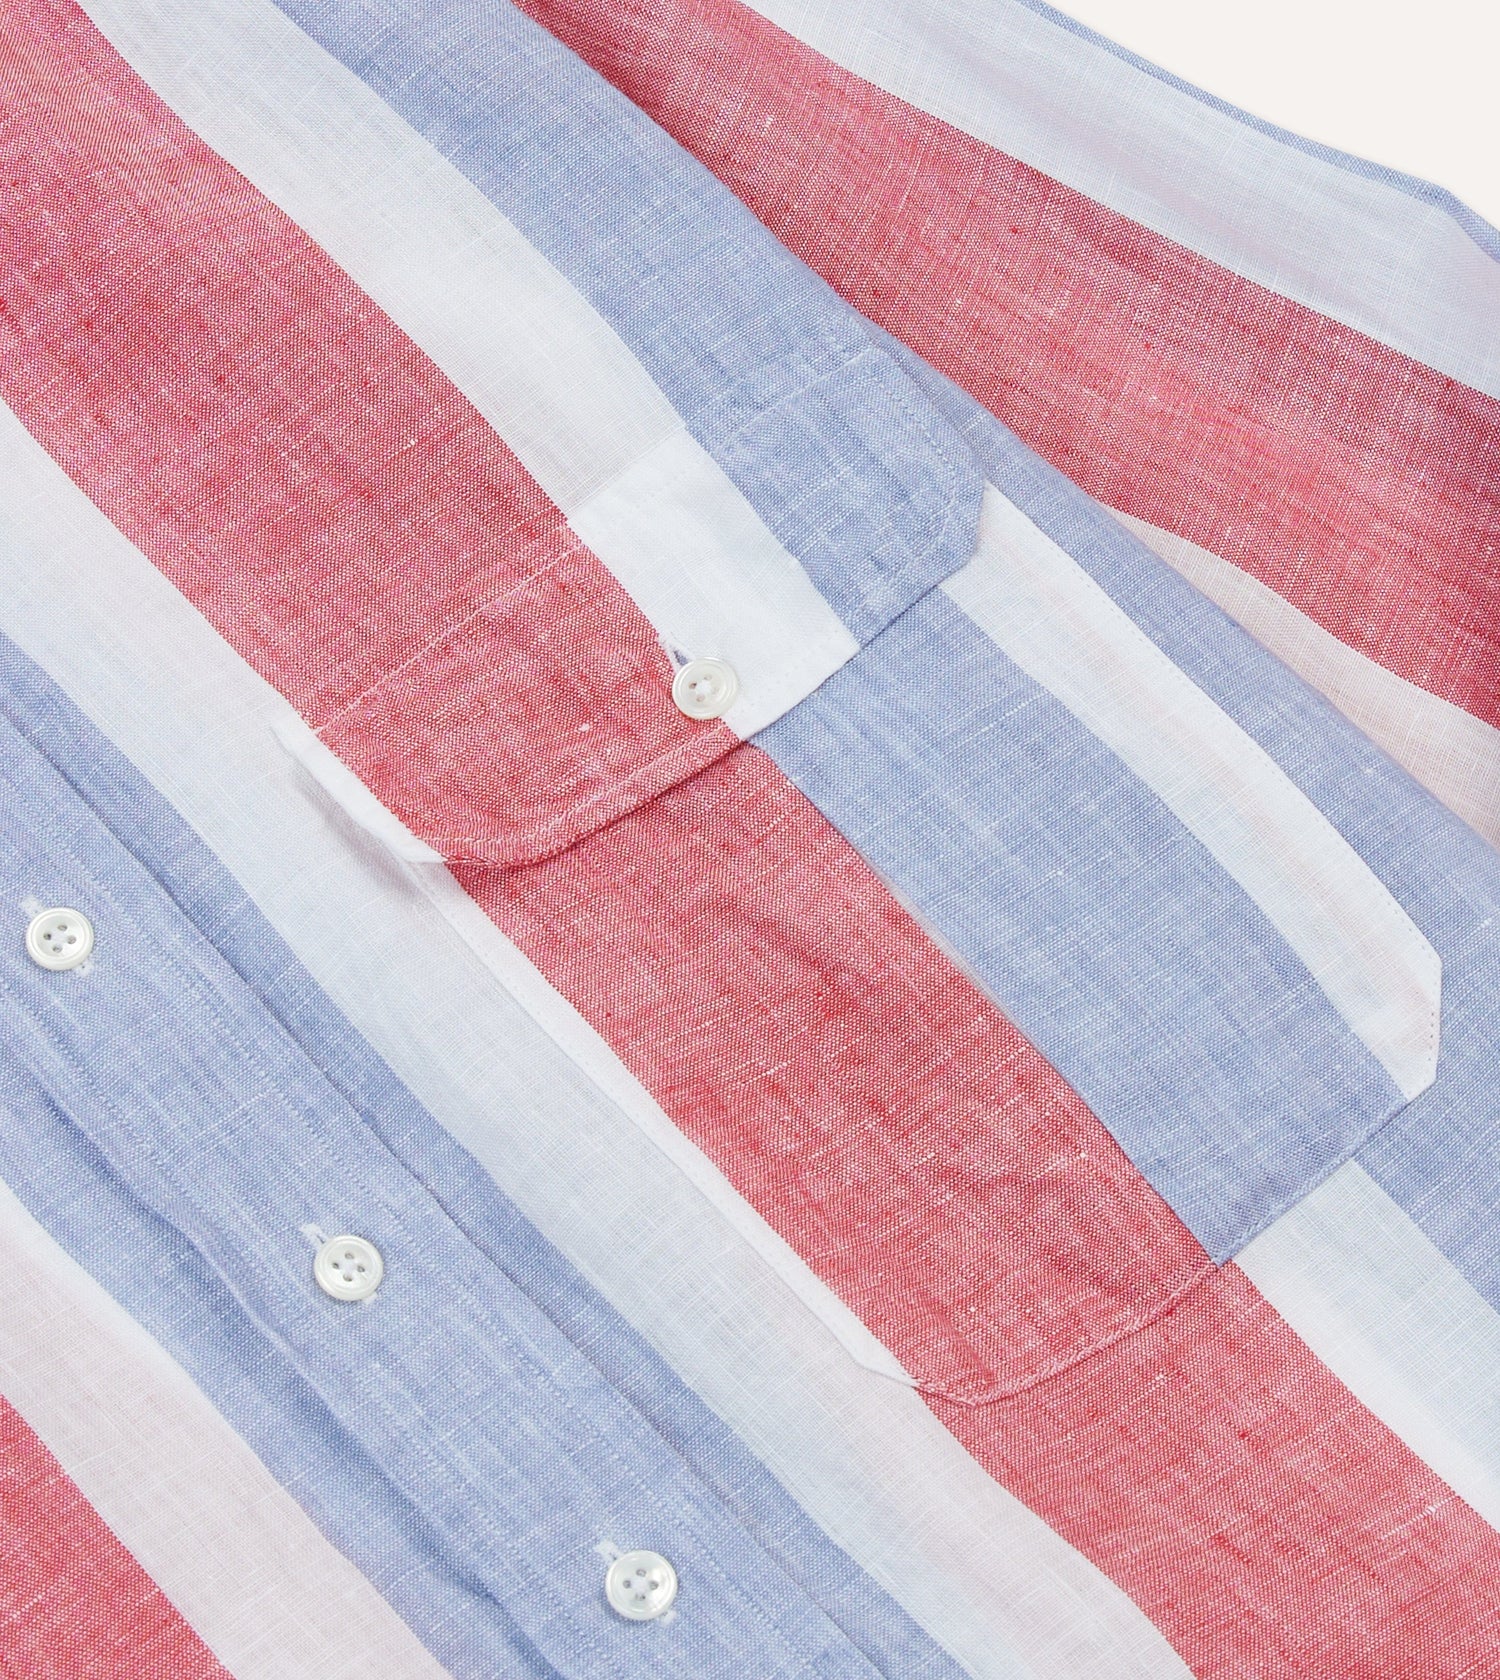 Red and Blue Stripe Linen Spread Collar Shirt